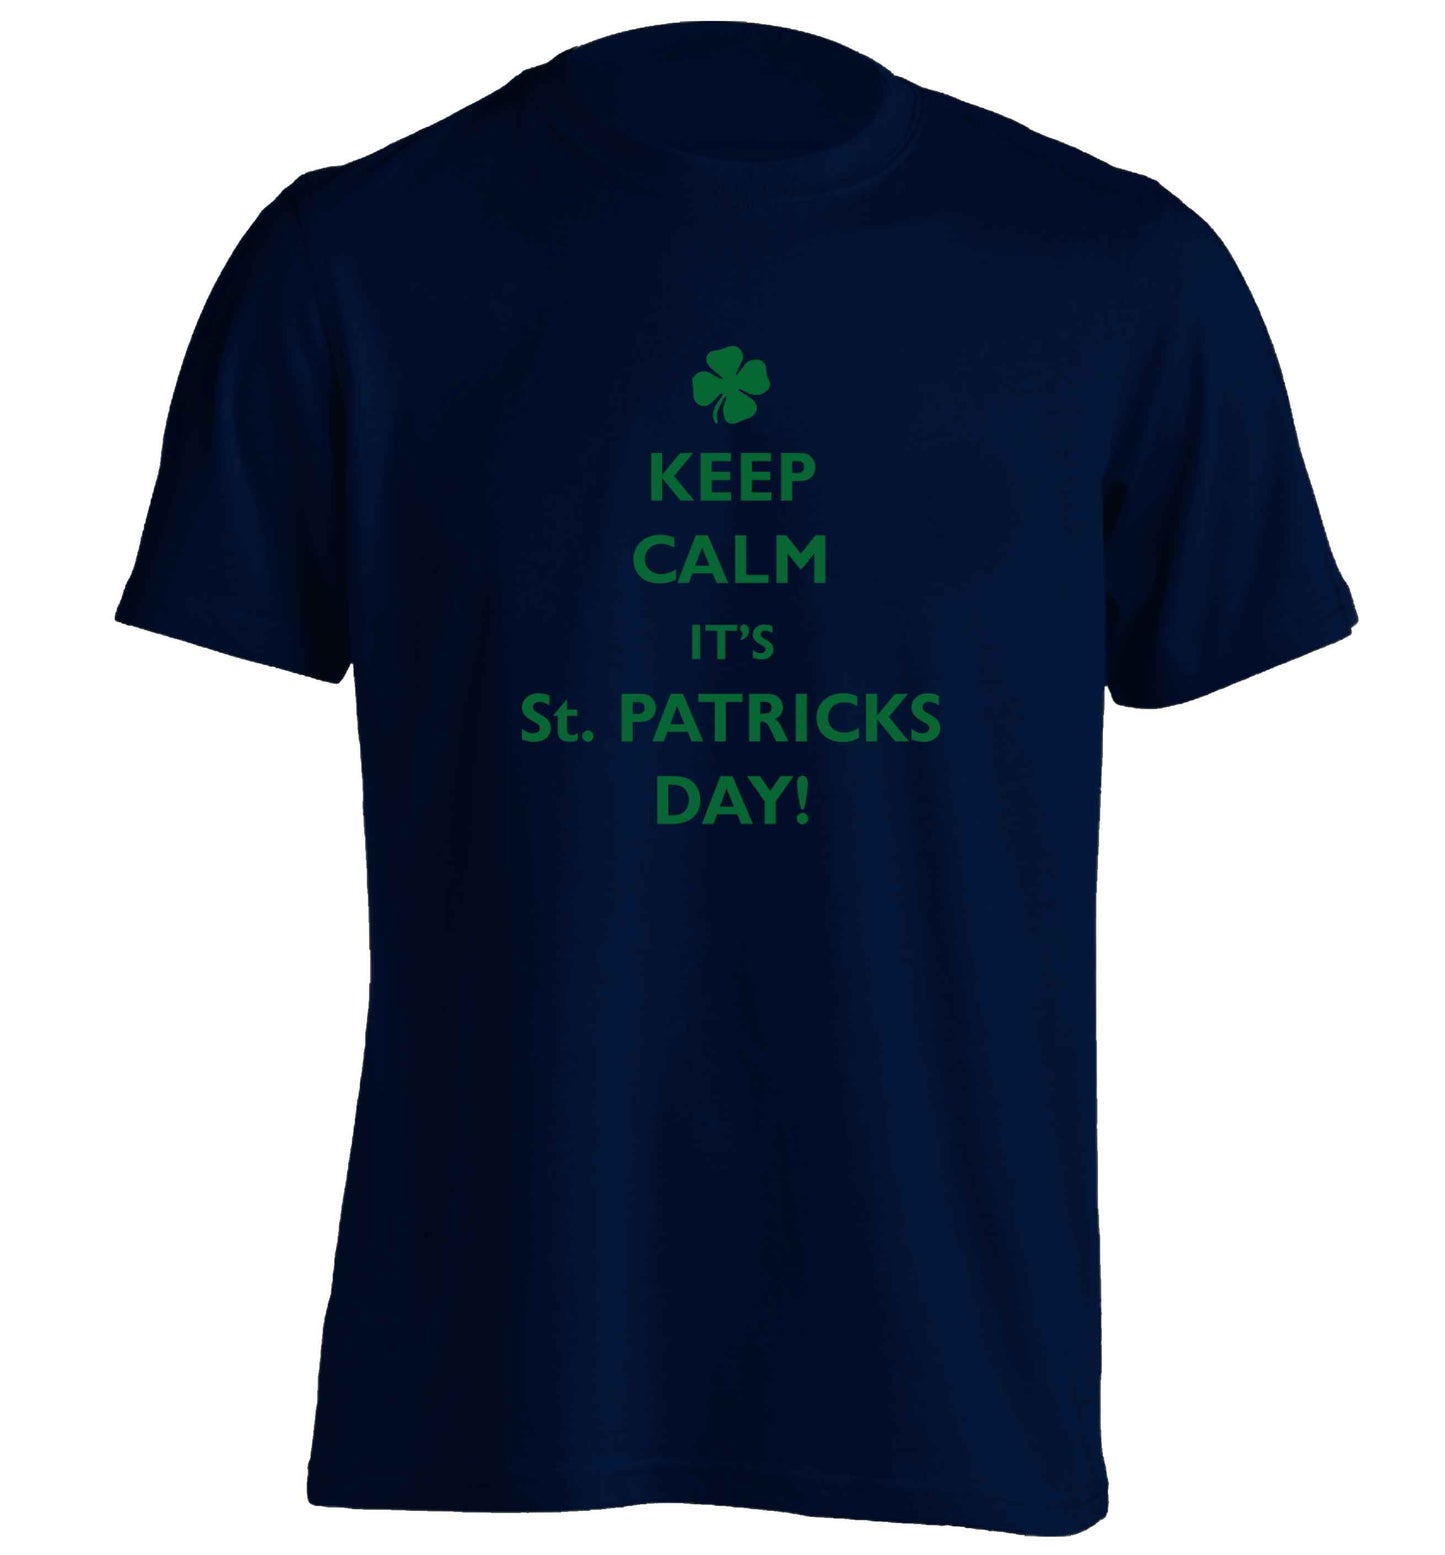 I can't keep calm it's St.Patricks day adults unisex navy Tshirt 2XL